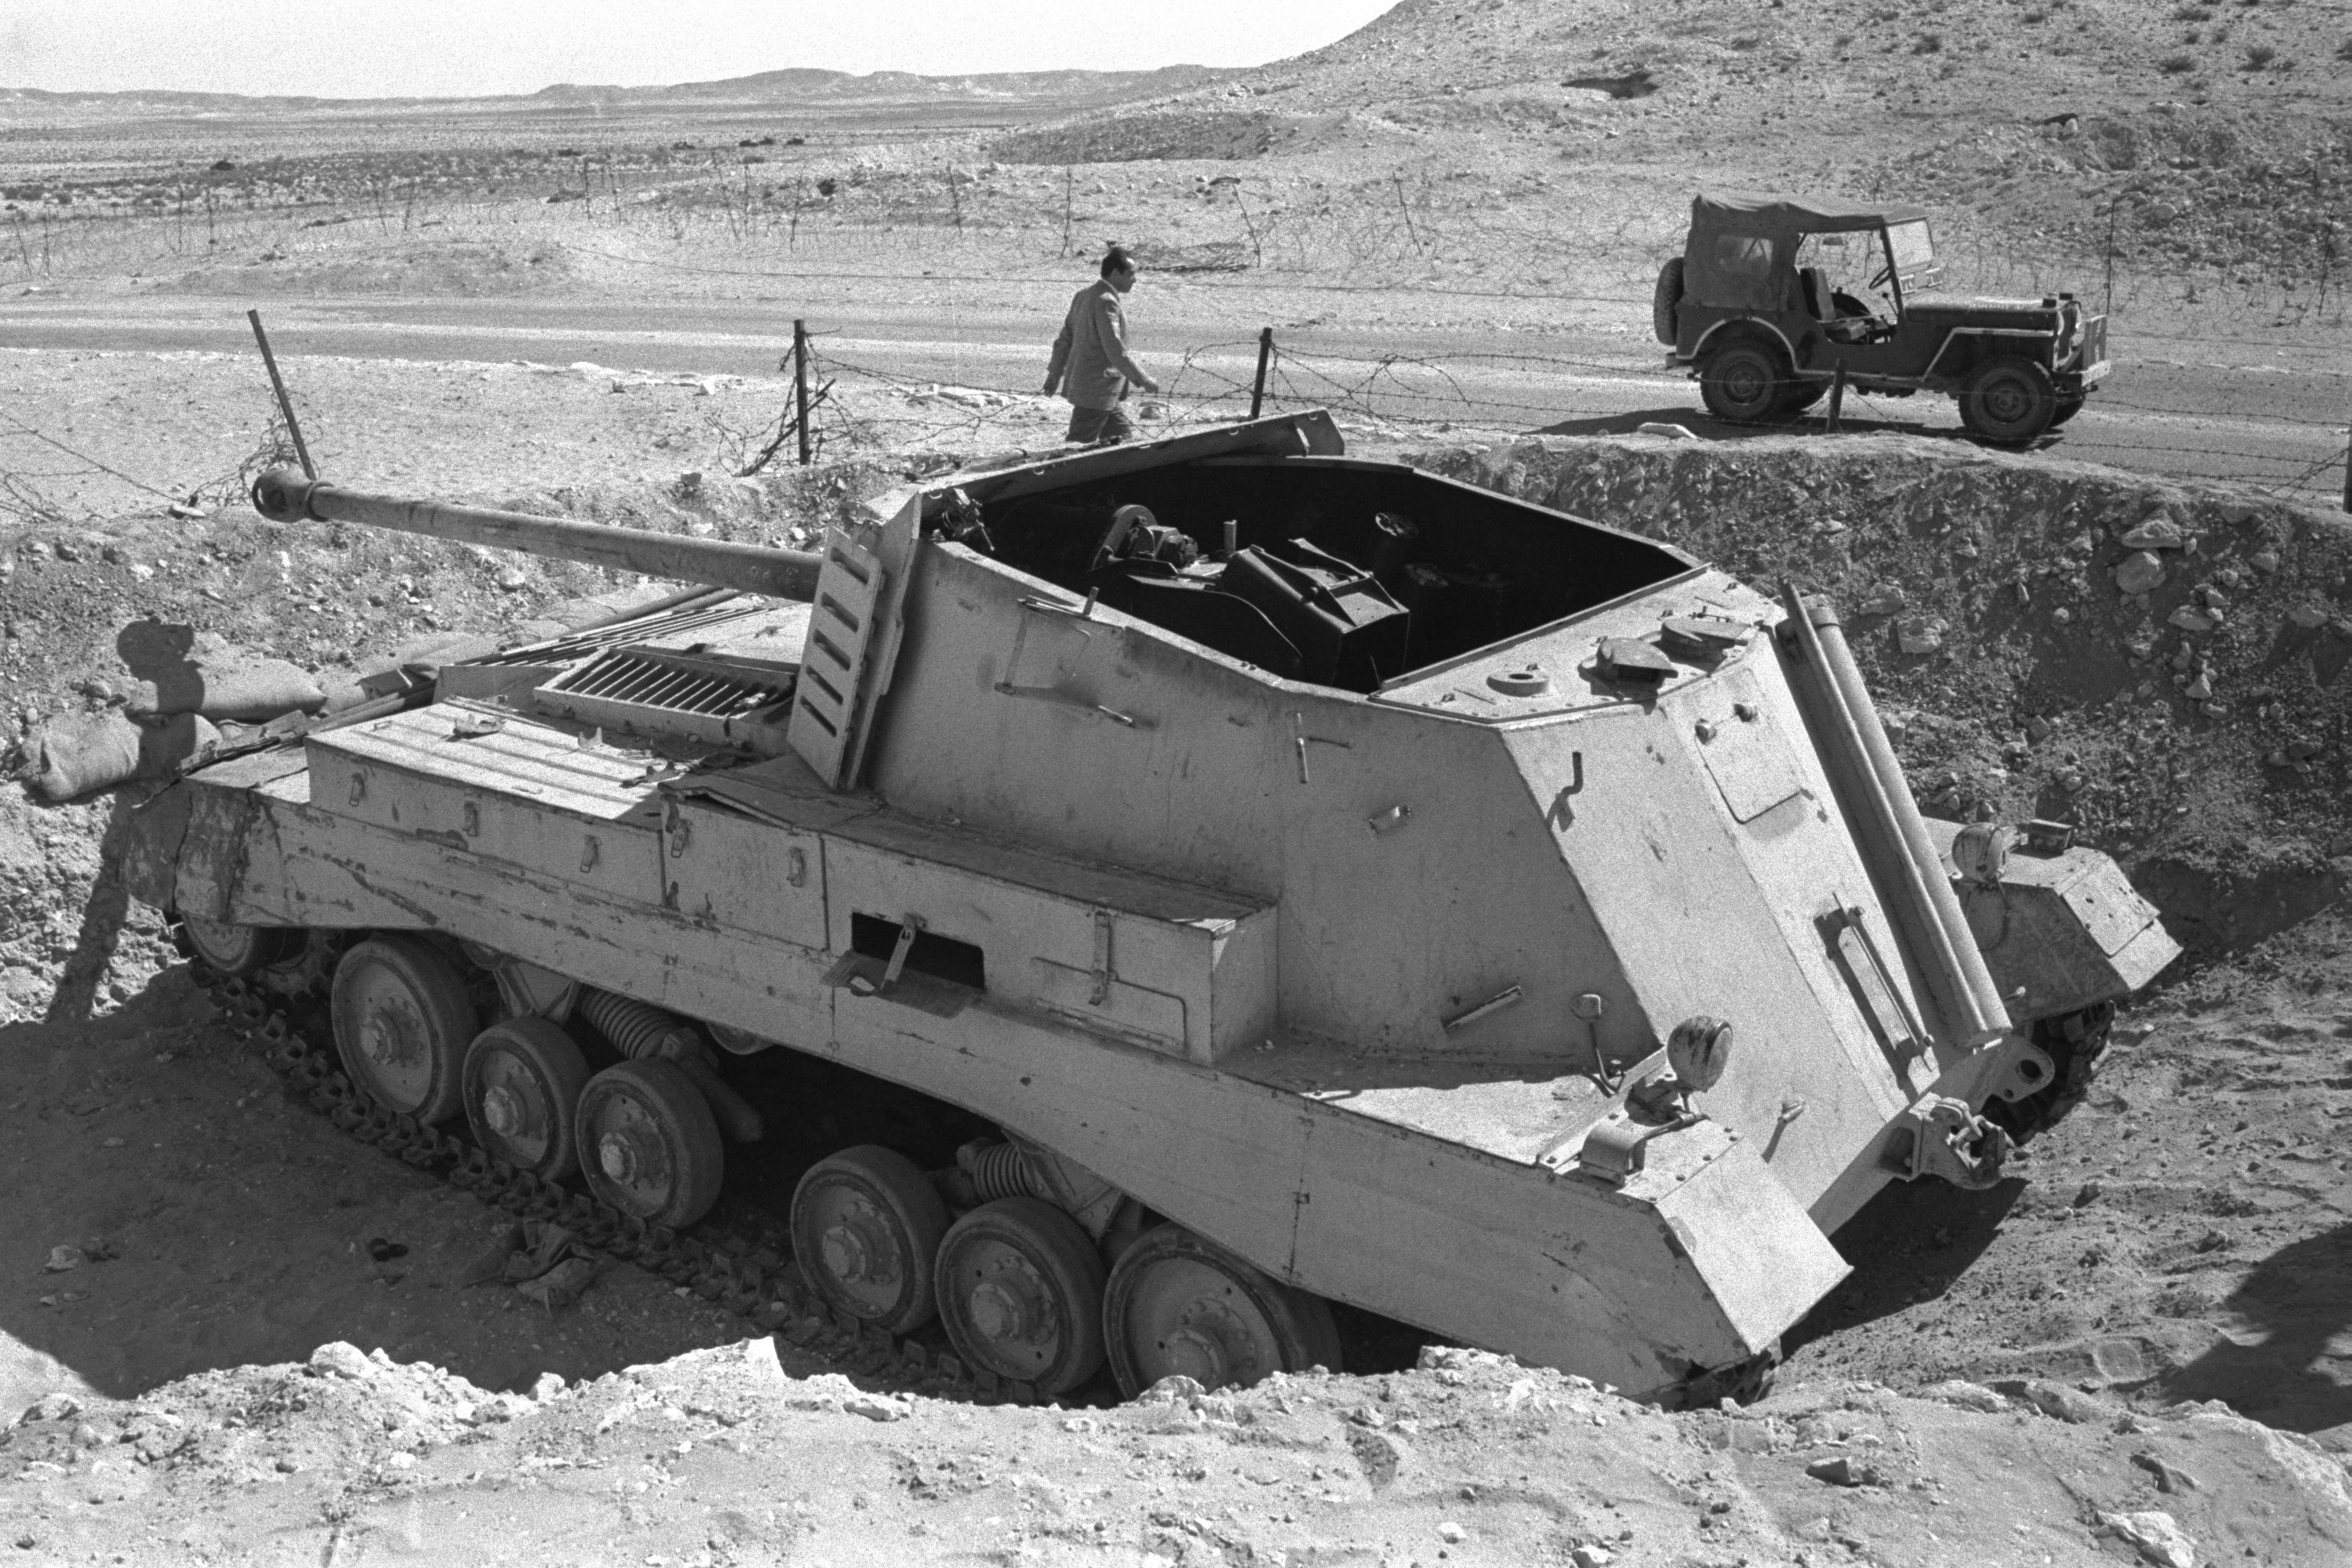 Egyptian_archer_tank_destroyer_knocked_out_by_Israeli_tanks_at_Abu_Ageila_-_1956.jpg